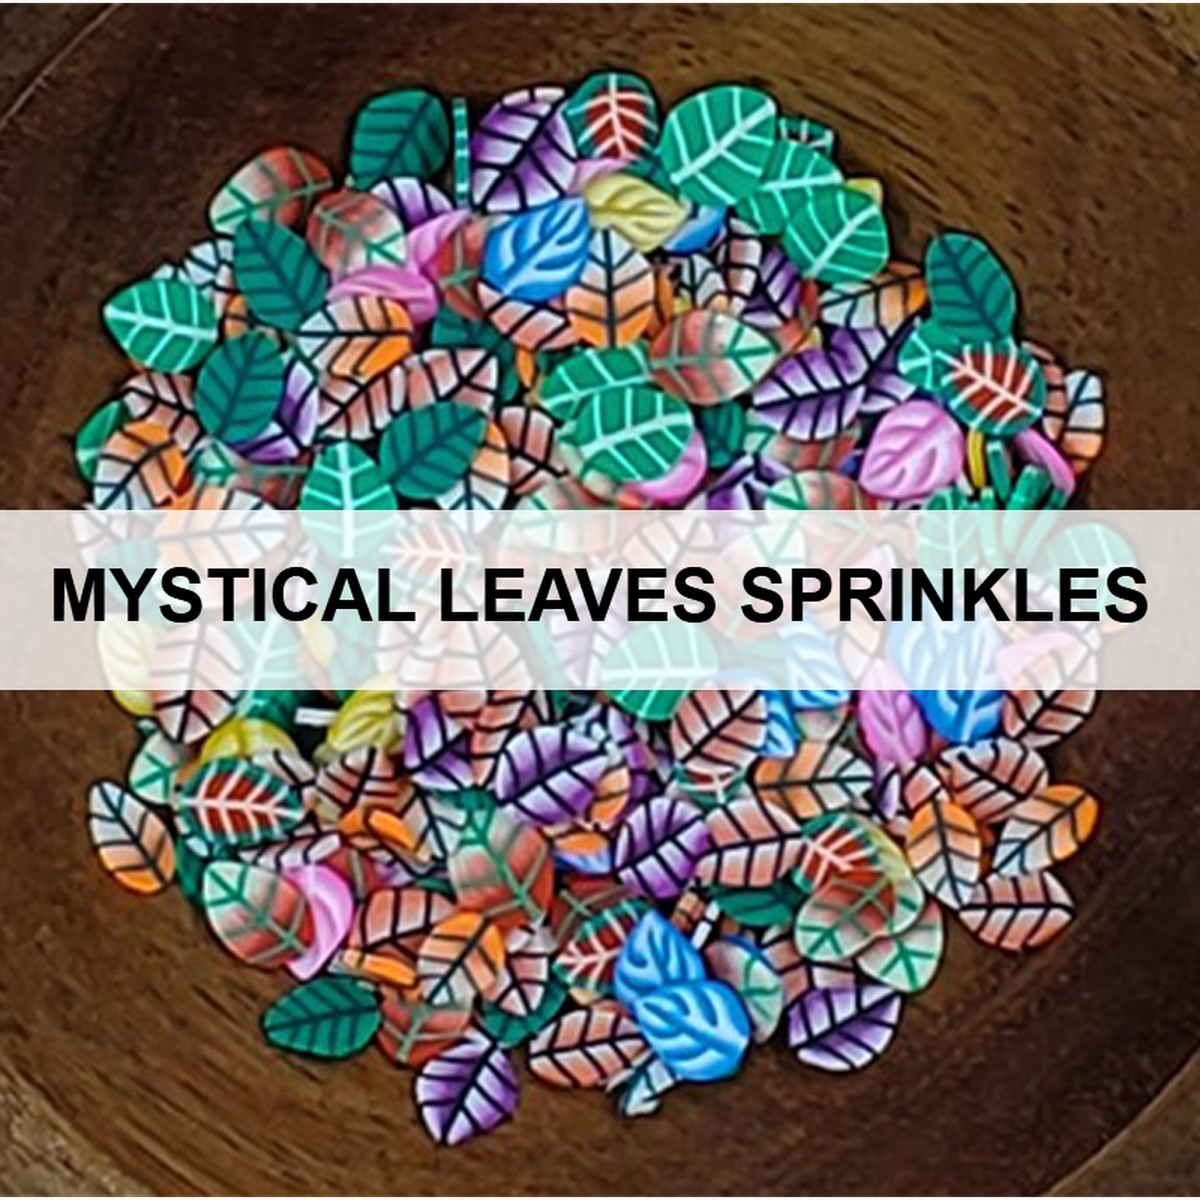 Mystical Leaves Sprinkles by Kat Scrappiness - Kat Scrappiness